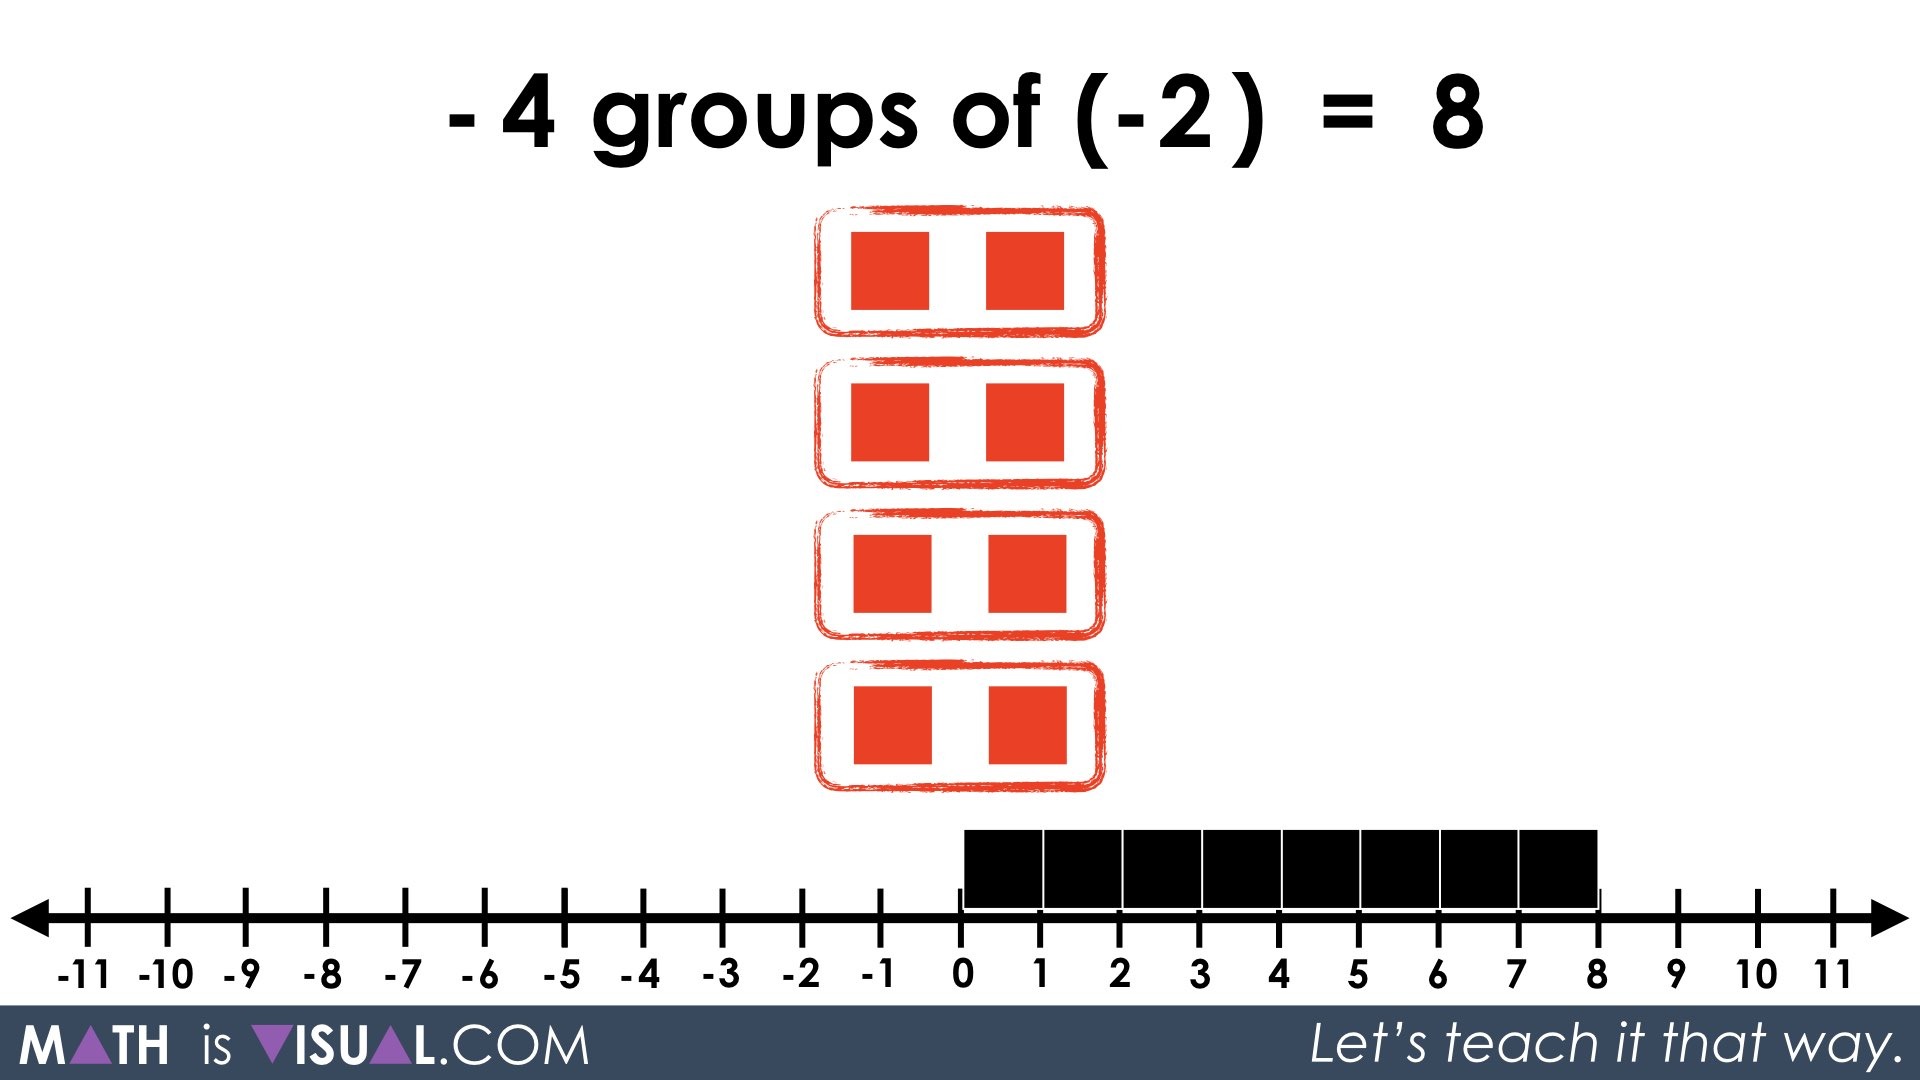 integer-multiplication-visually-and-symbolically-057-4-groups-of-2